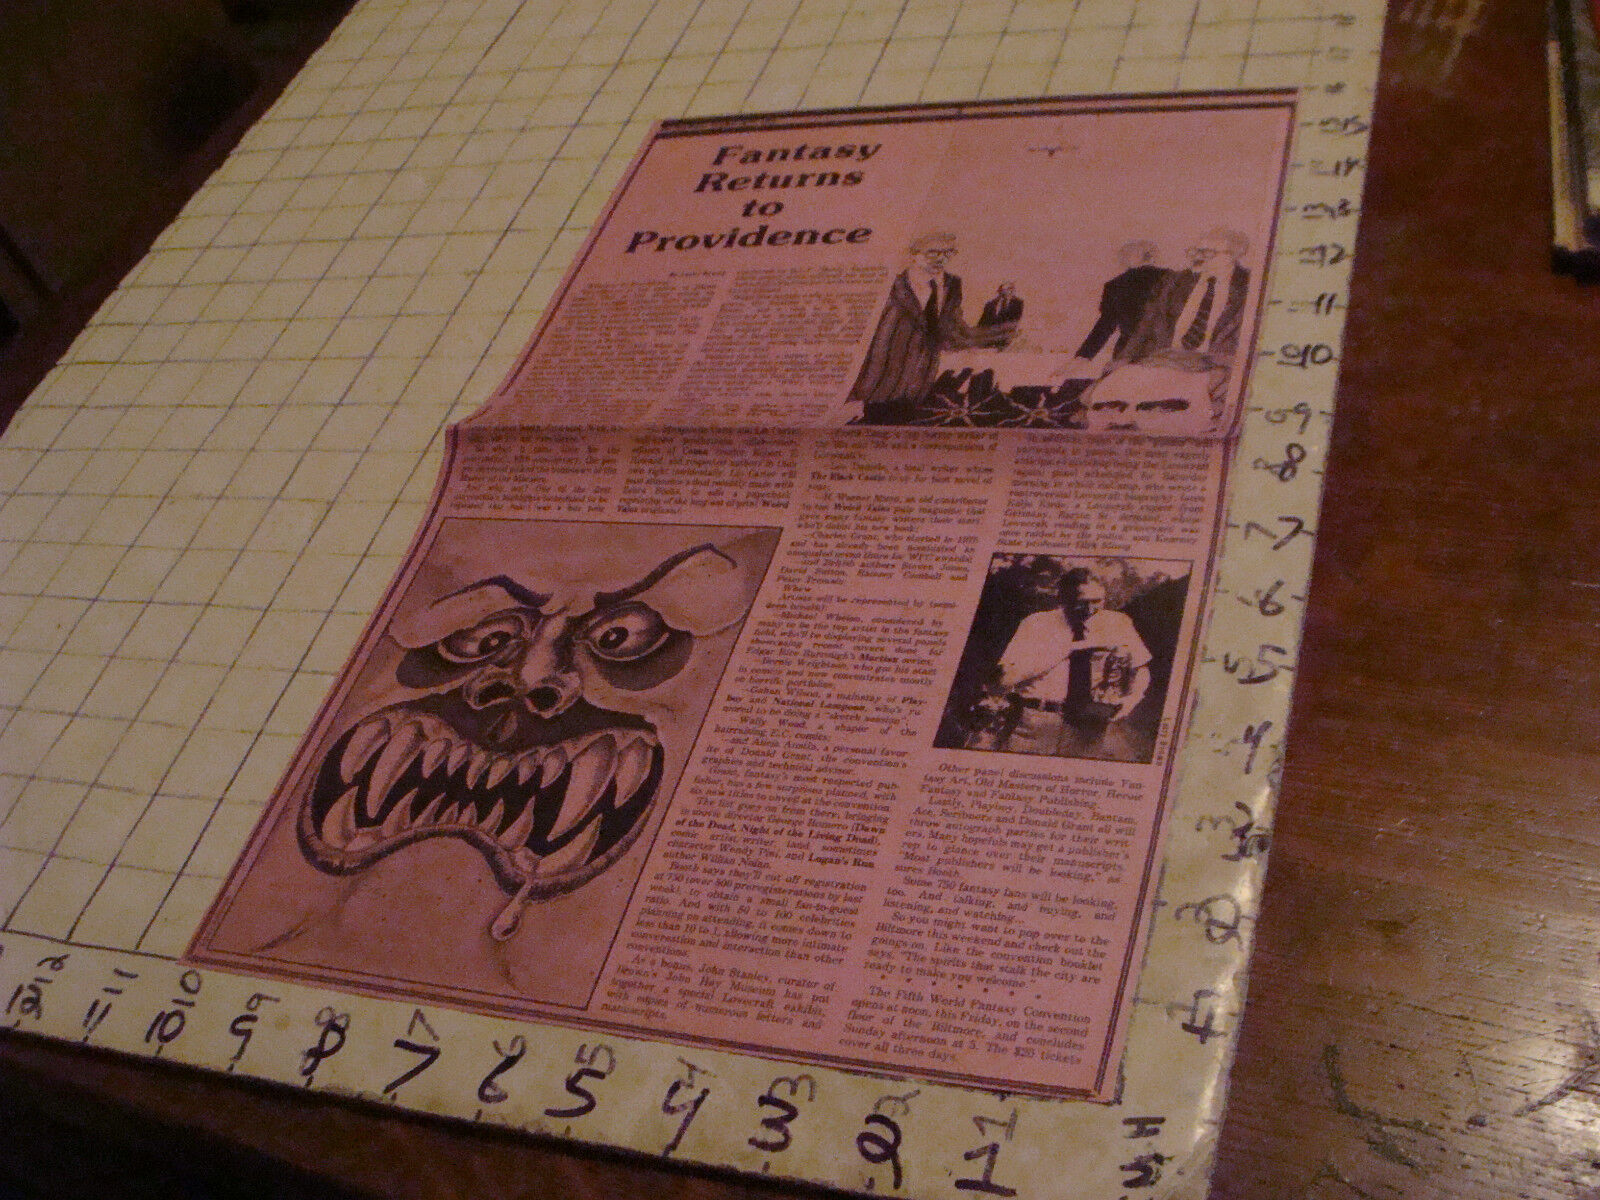 original  1979 NEW PAPER article: FANTASY RETURNS TO PROVIDENCE lovecraft relate